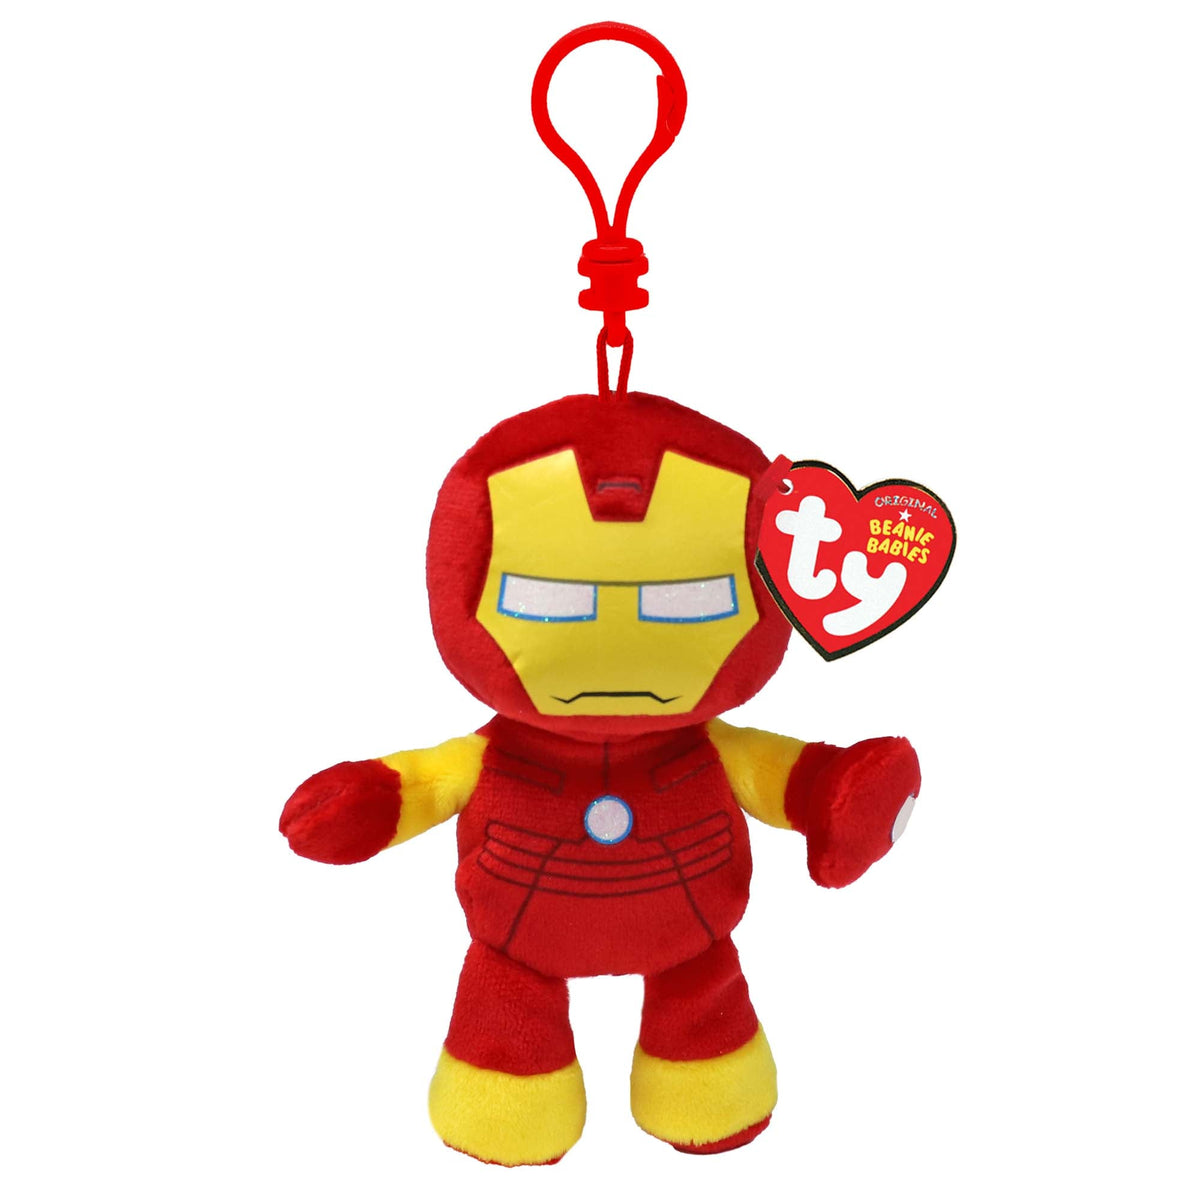 TY INC Plushes Marvel TY Beanie Boos Plush with Clip, Iron Man, 5 Inches, 1 Count